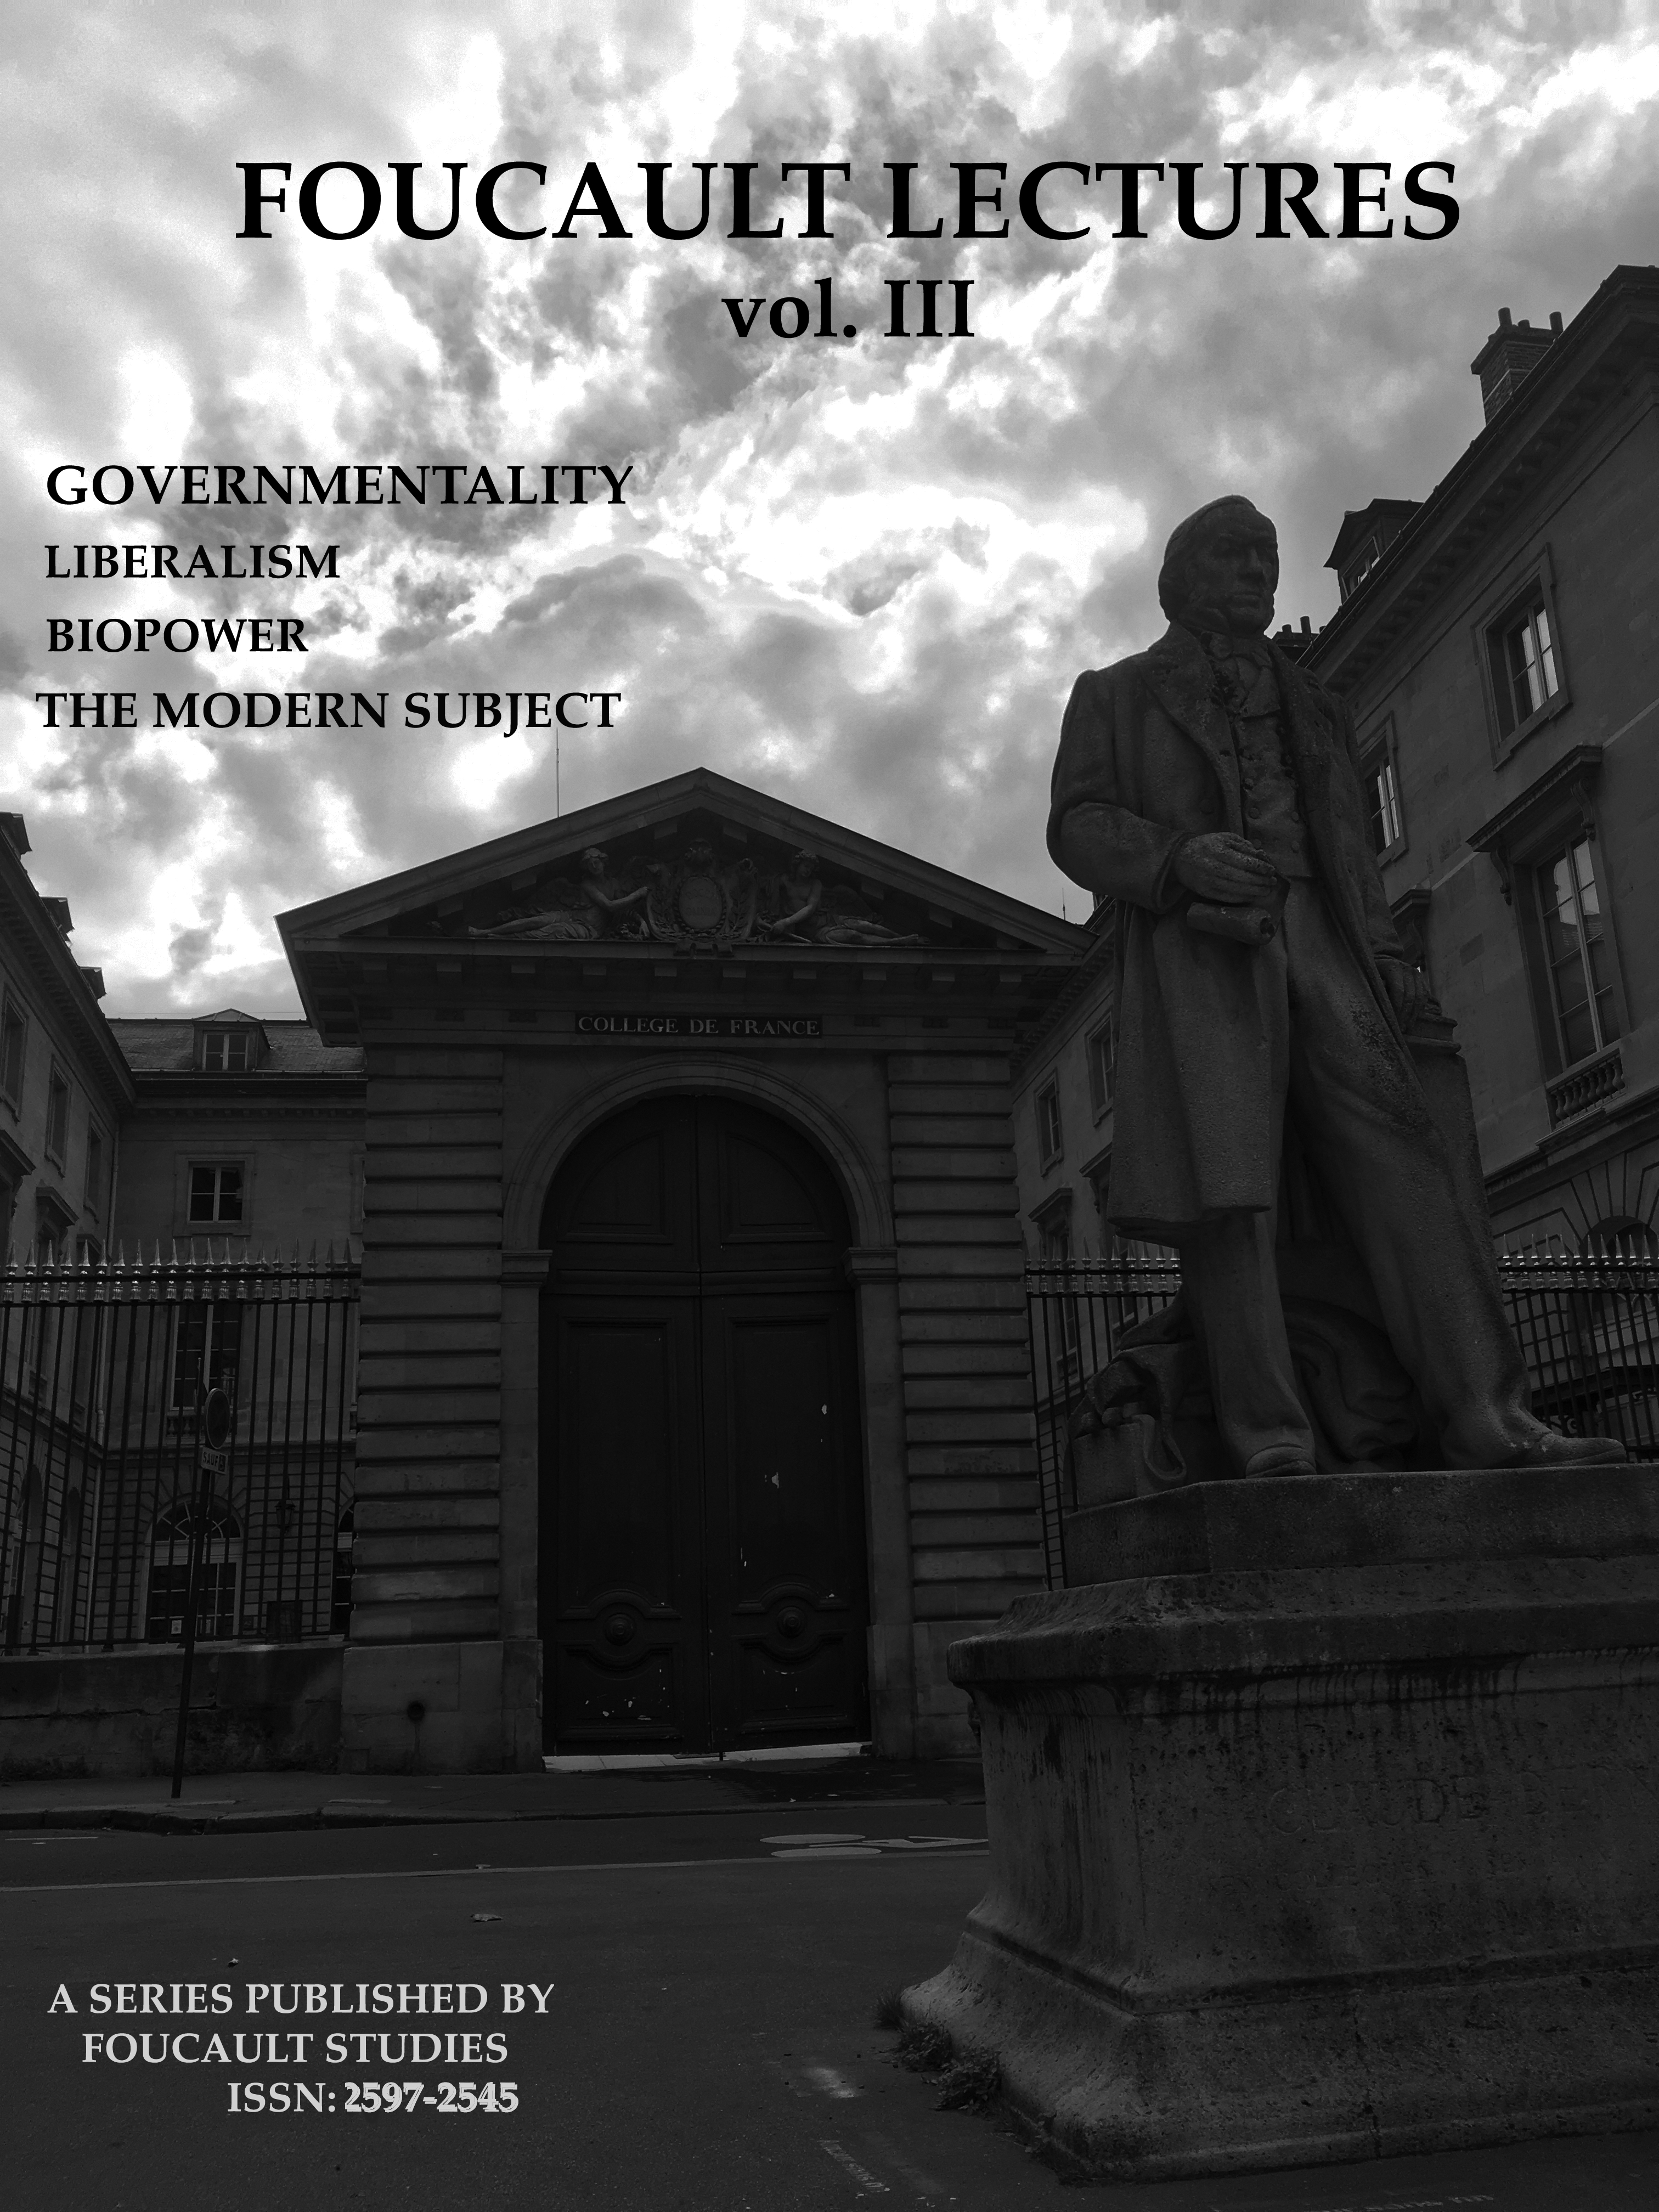 					View Vol III, No 1: Governmentality, Liberalism, Biopower, Genealogy of the Modern Subject. 
				